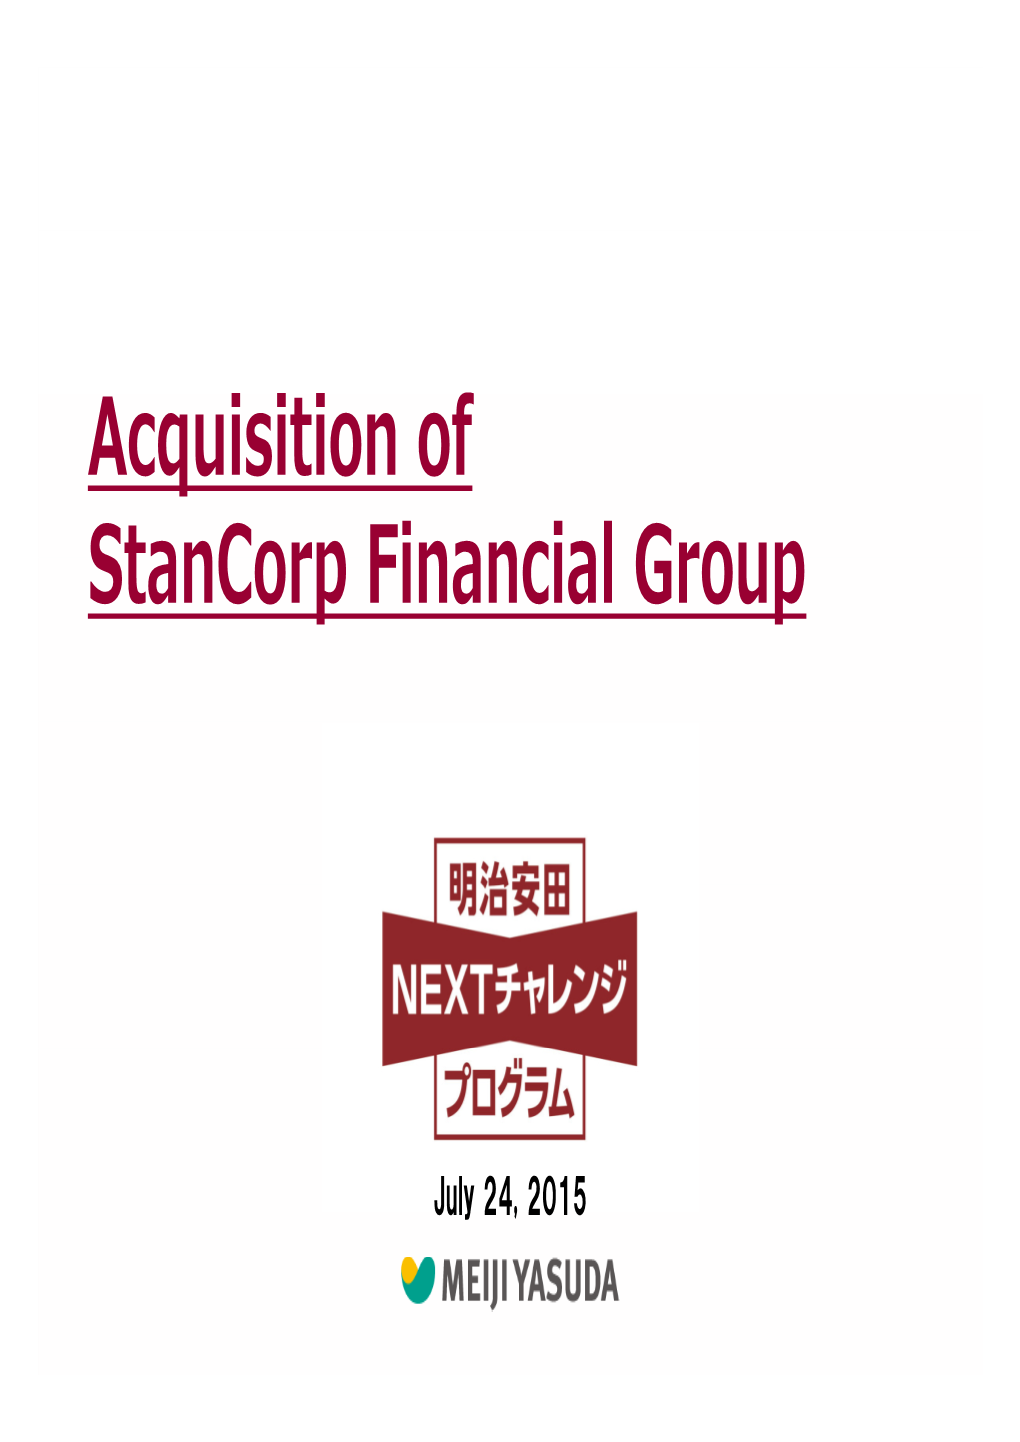 I I I F Acquisition of Stancorp Financial Group